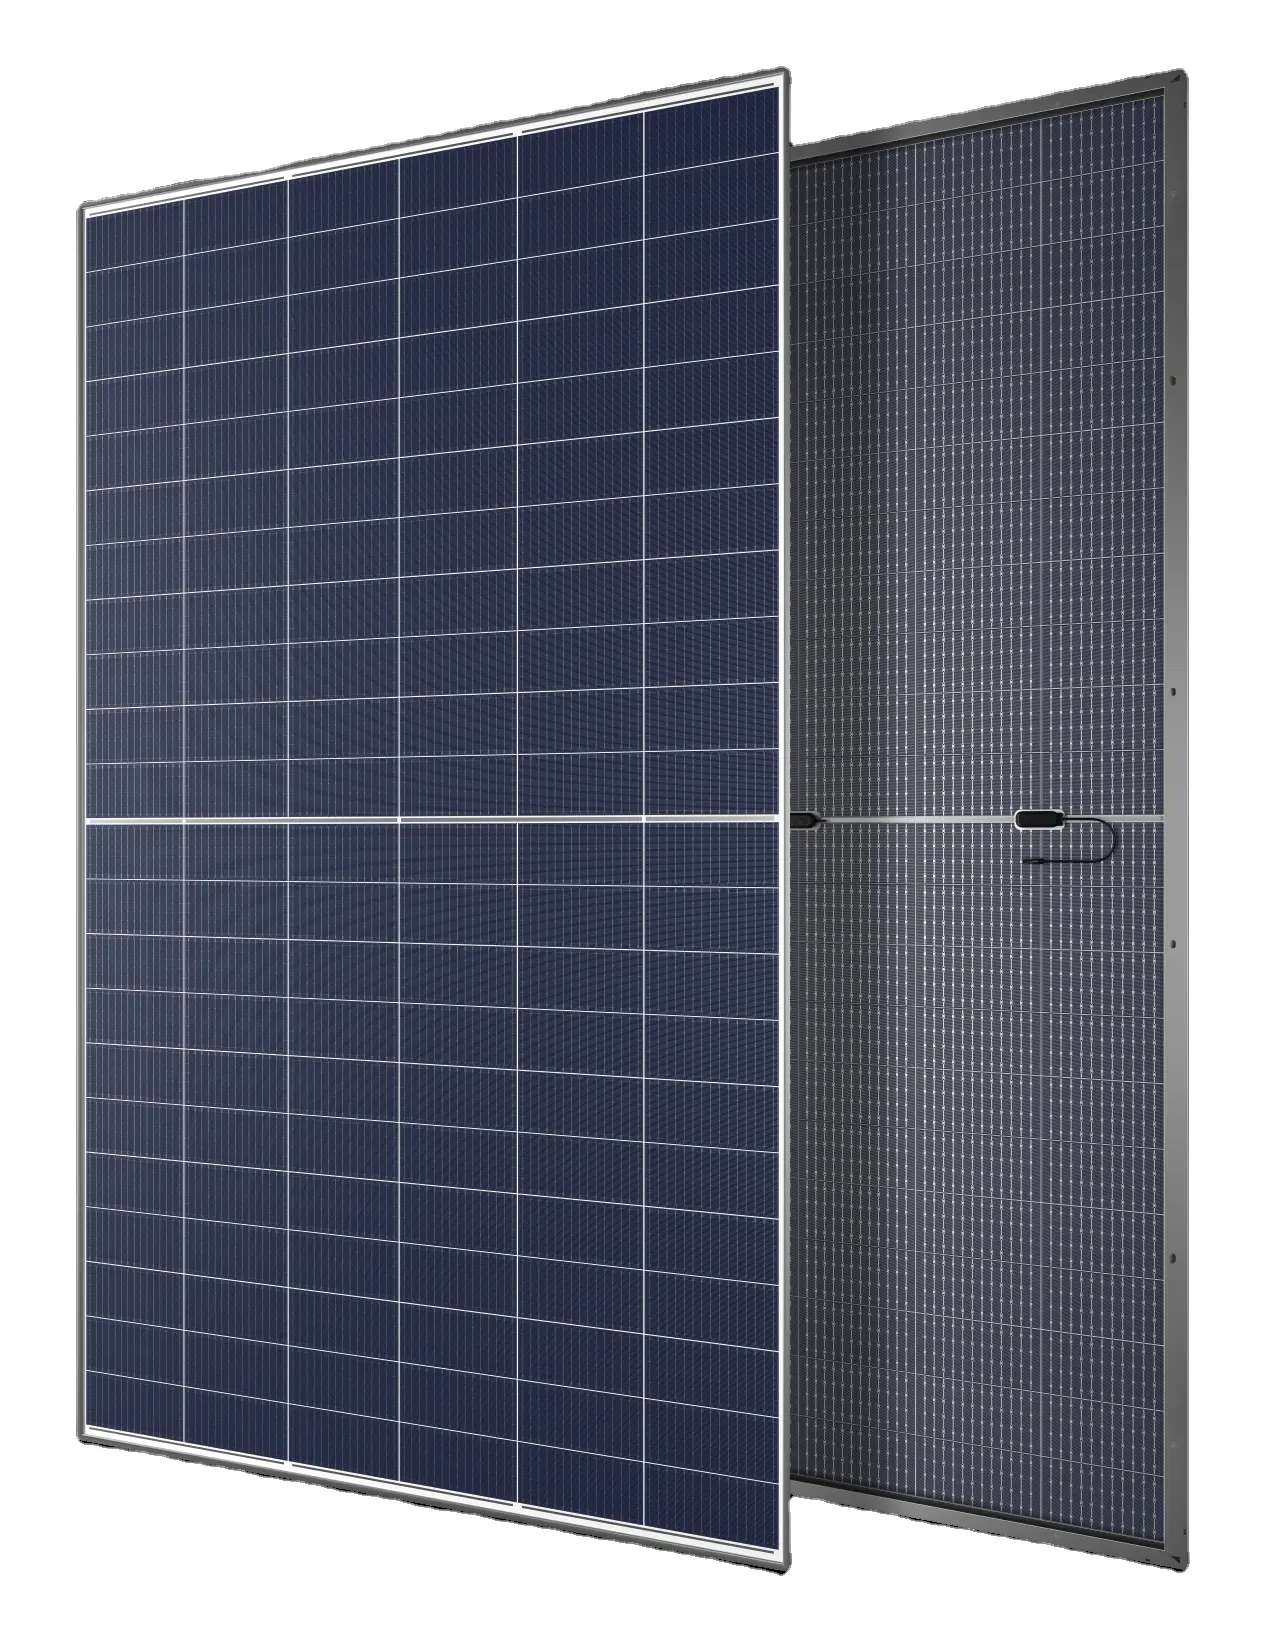 New product tier 1 factory price HJT 26% efficiency conversion 695w solar panels.